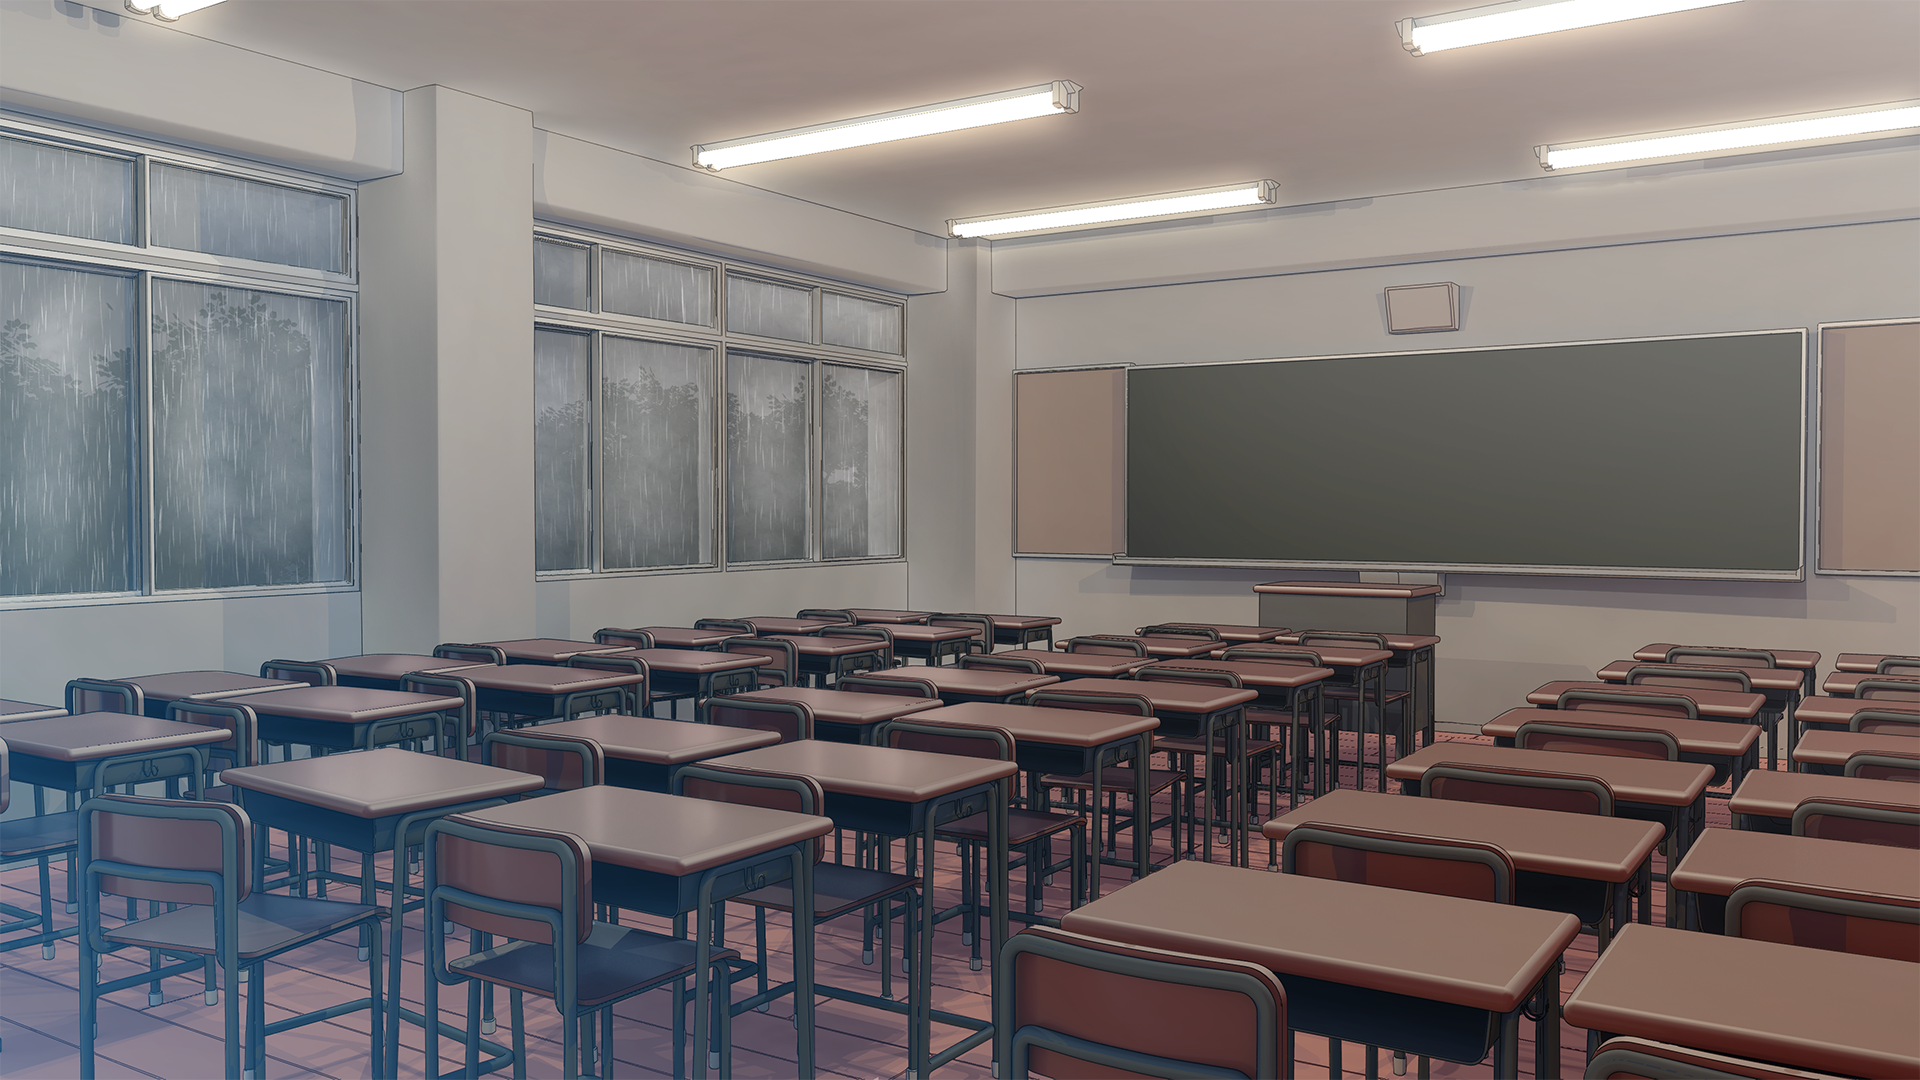 70+ Classroom HD Wallpapers and Backgrounds